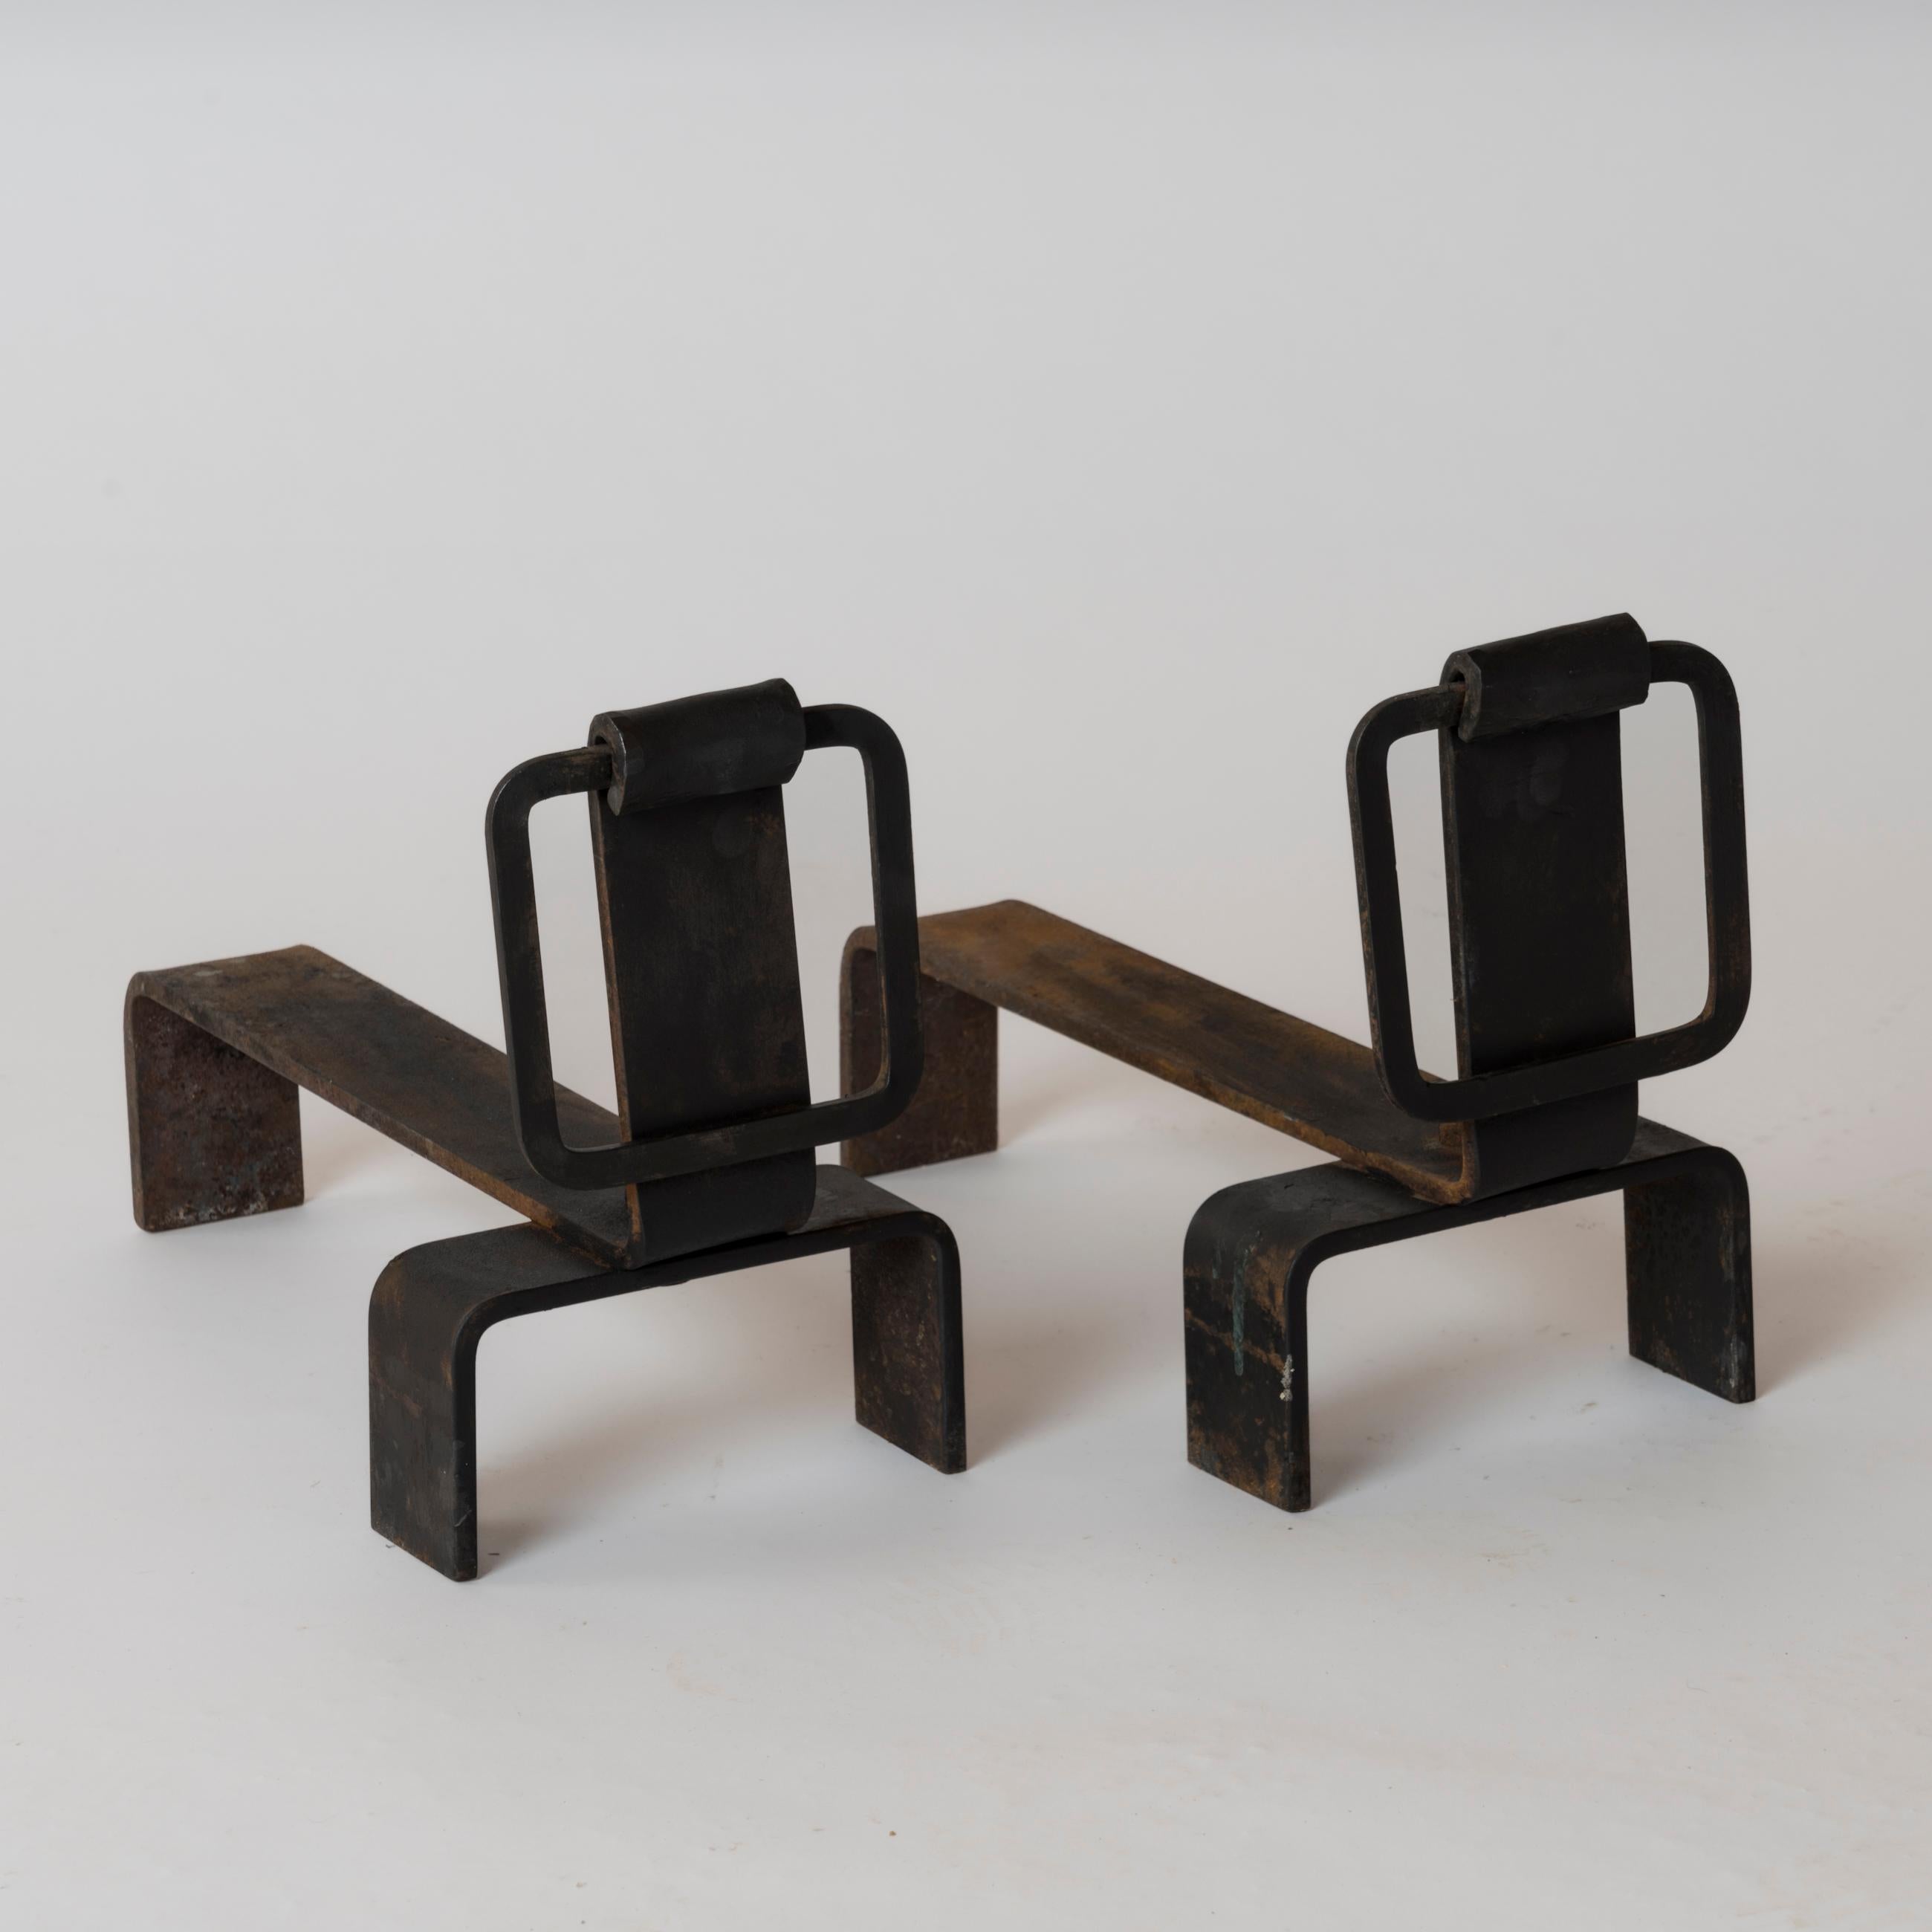 Forged Pair of Brutalist Steel Andirons, France, 1970s